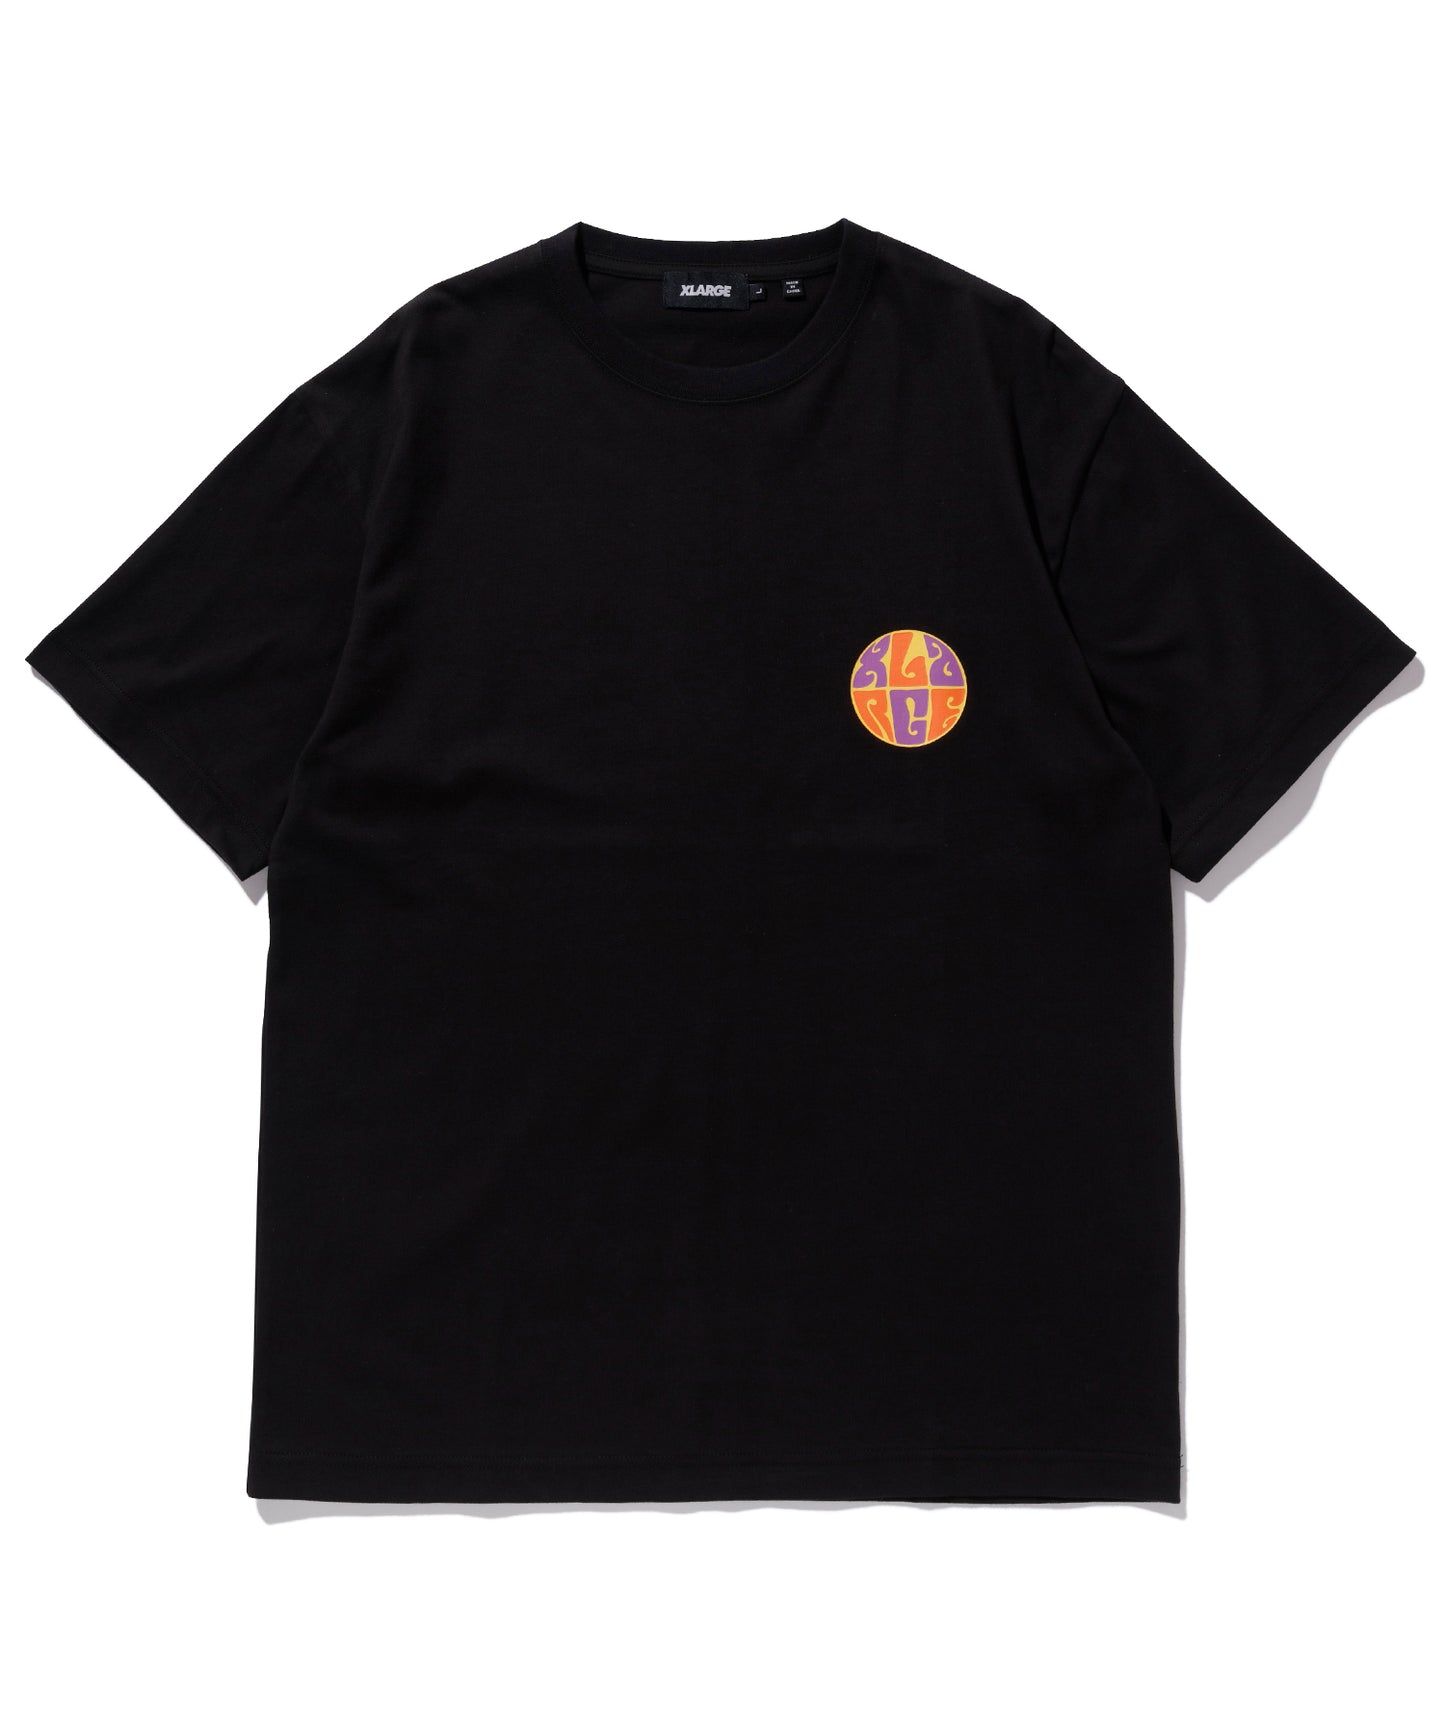 S/S TEE PSYCHEDELIC T-SHIRT XLARGE  